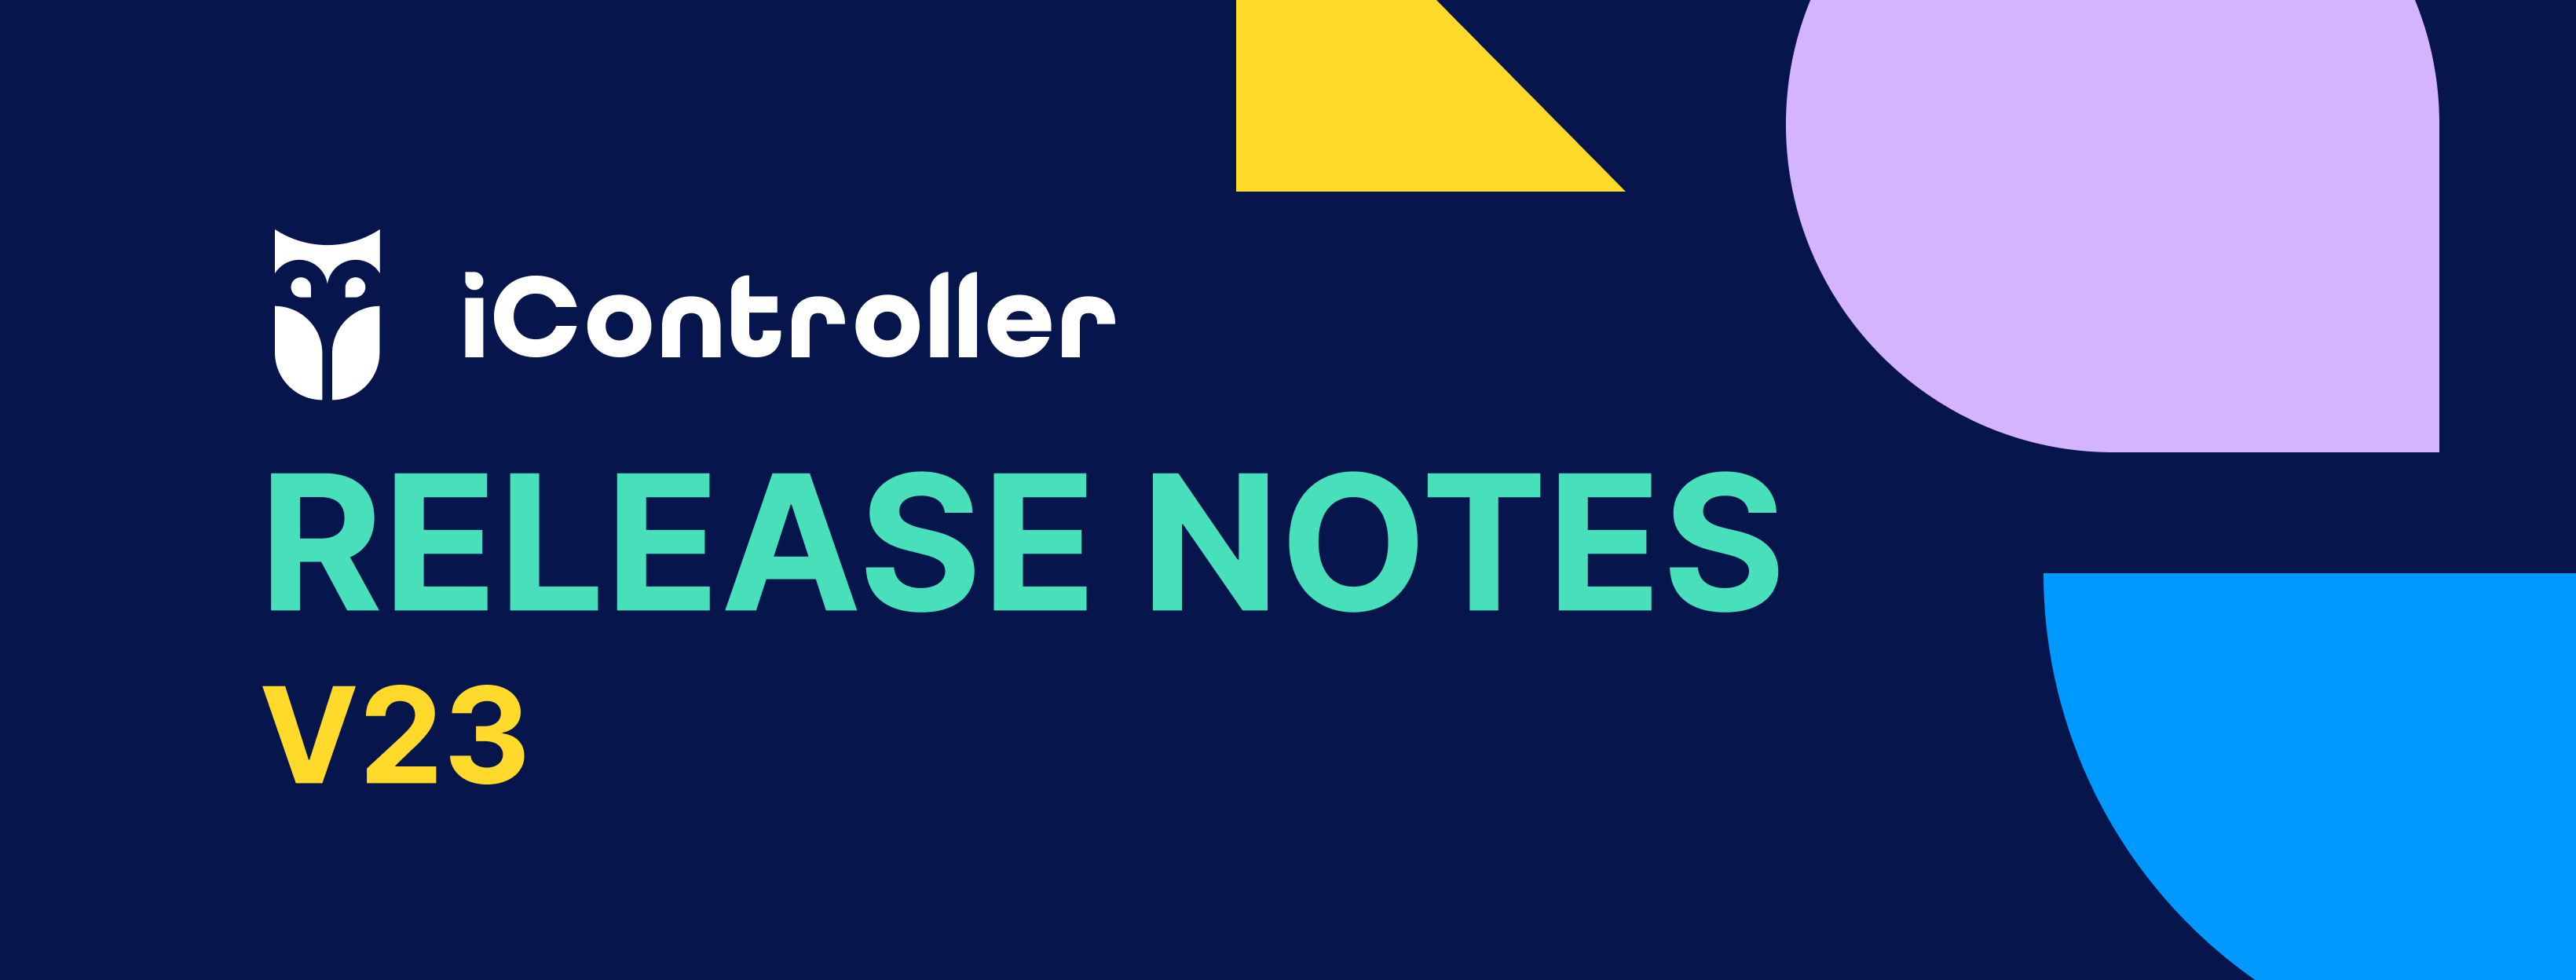 Release_notes.png